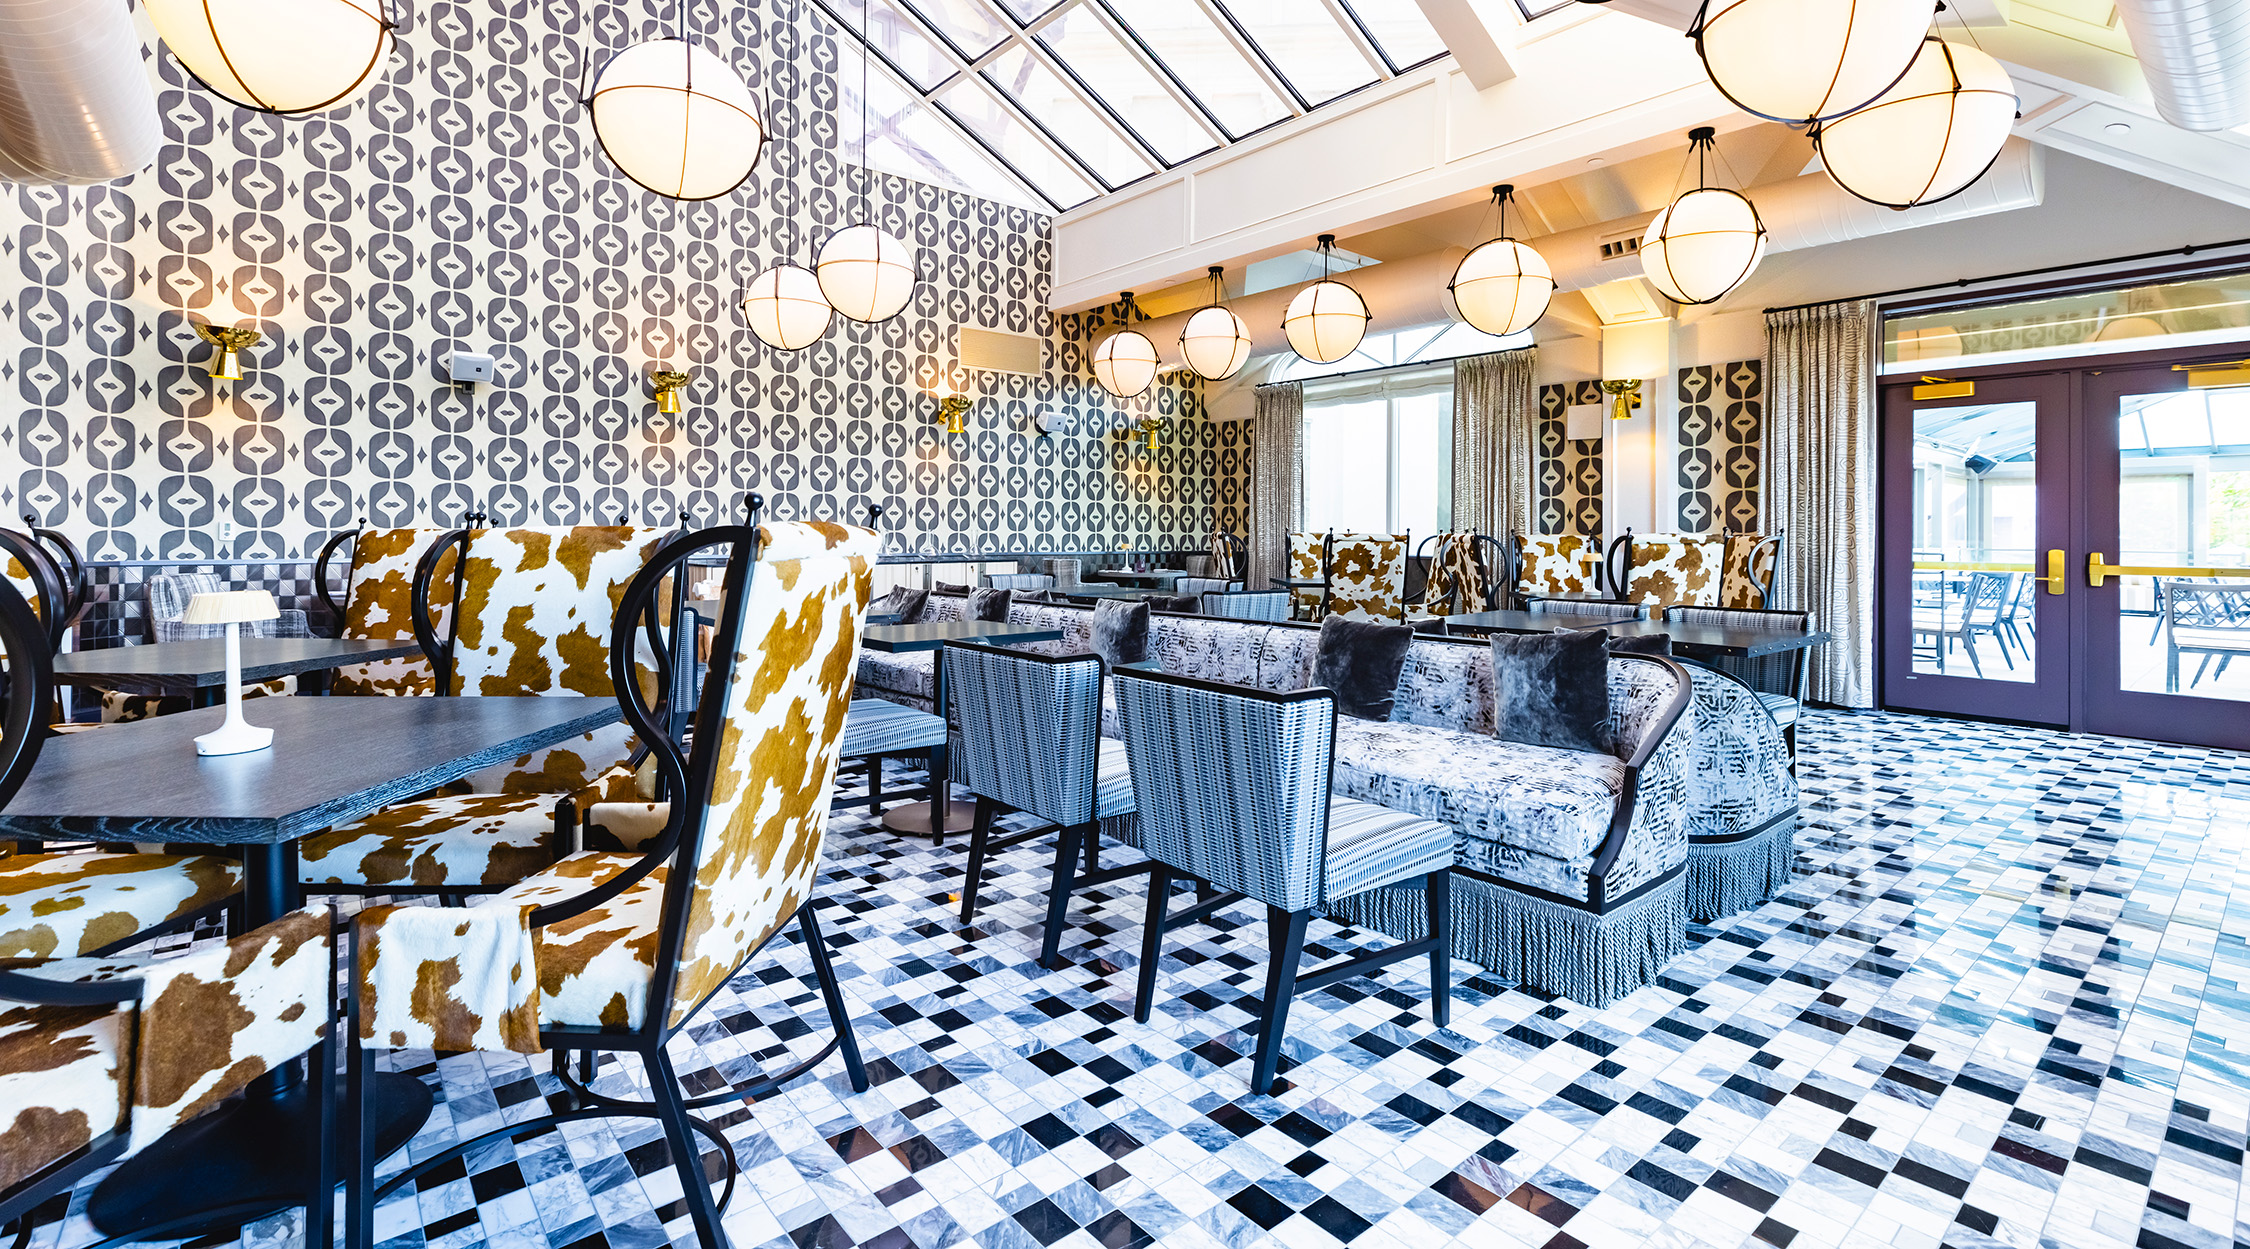 One of the numerous dining rooms inside Fawn & Fable in The Grand Lodge at Nemacolin, showing a tiles floor, unique and sumptuous furnishings, large skylights, and modern lighting